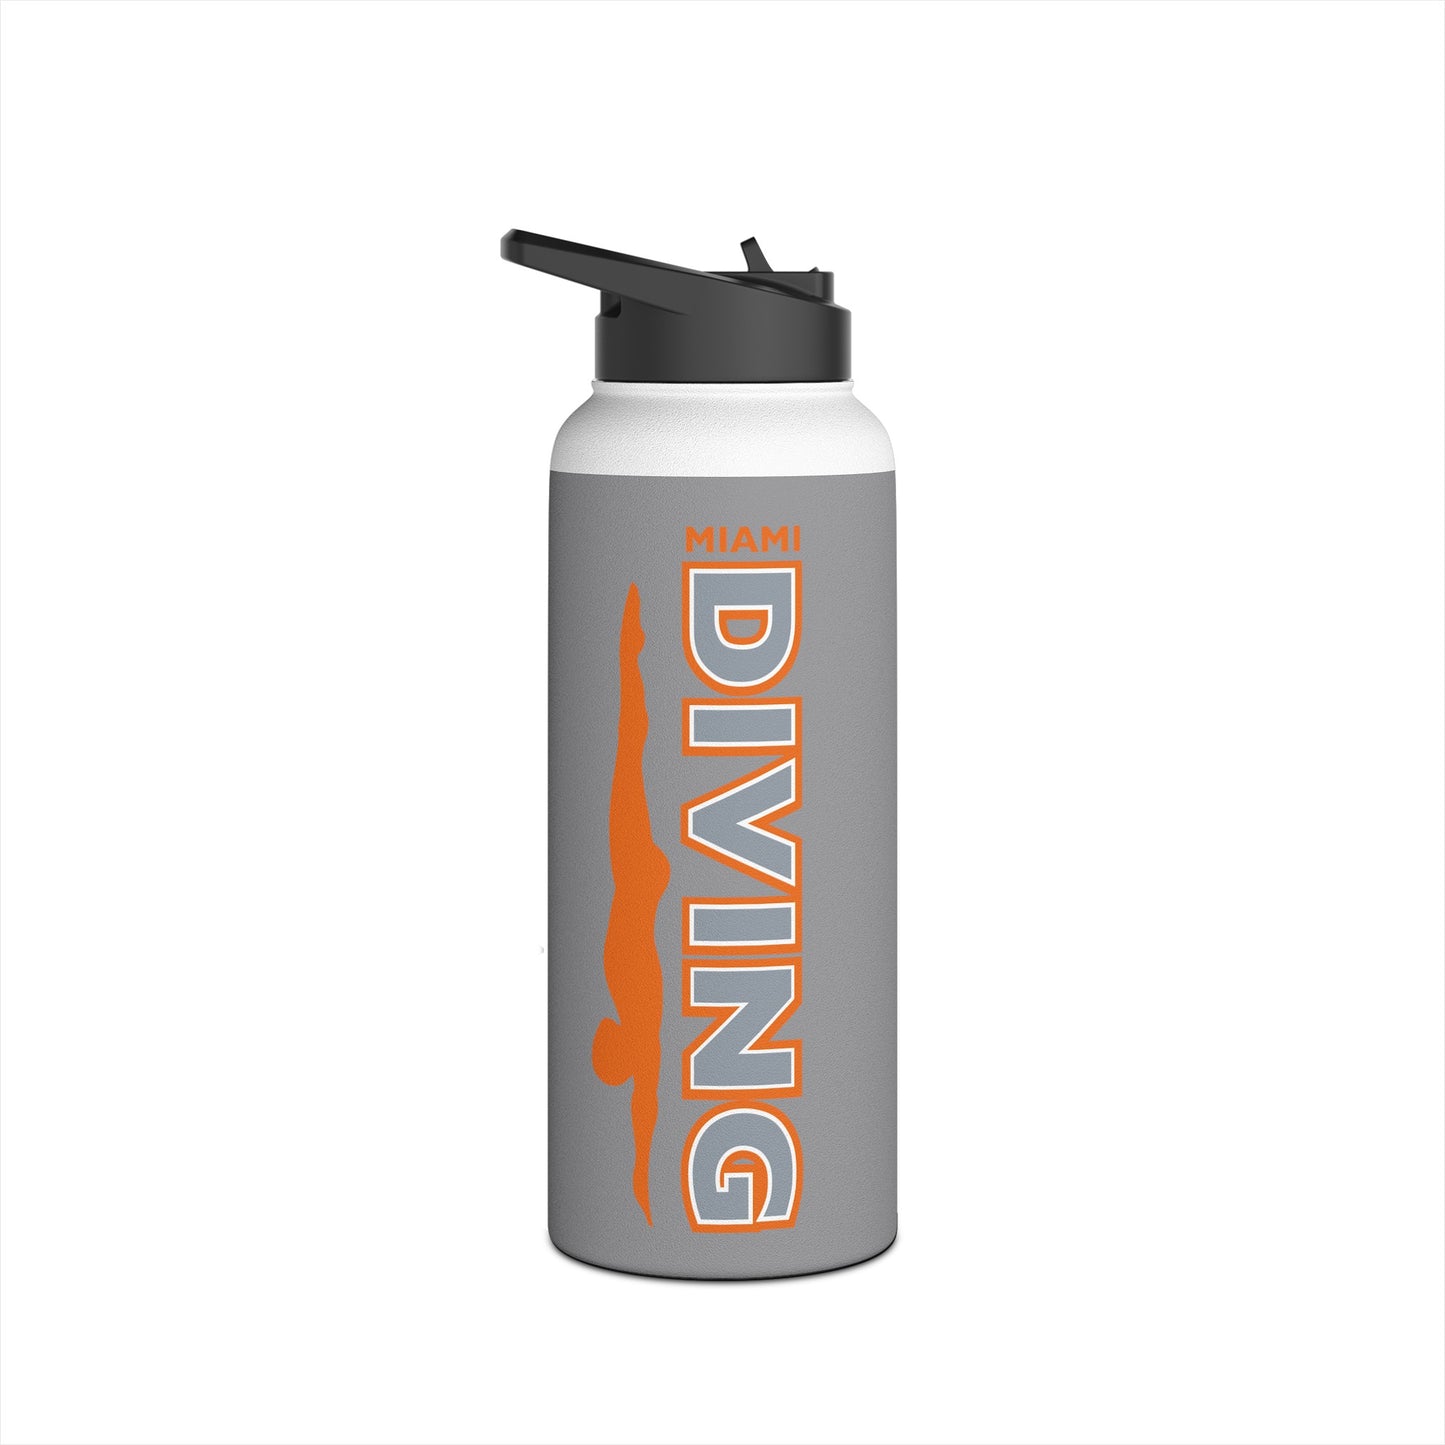 Miami Diving Stainless Steel Water Bottle